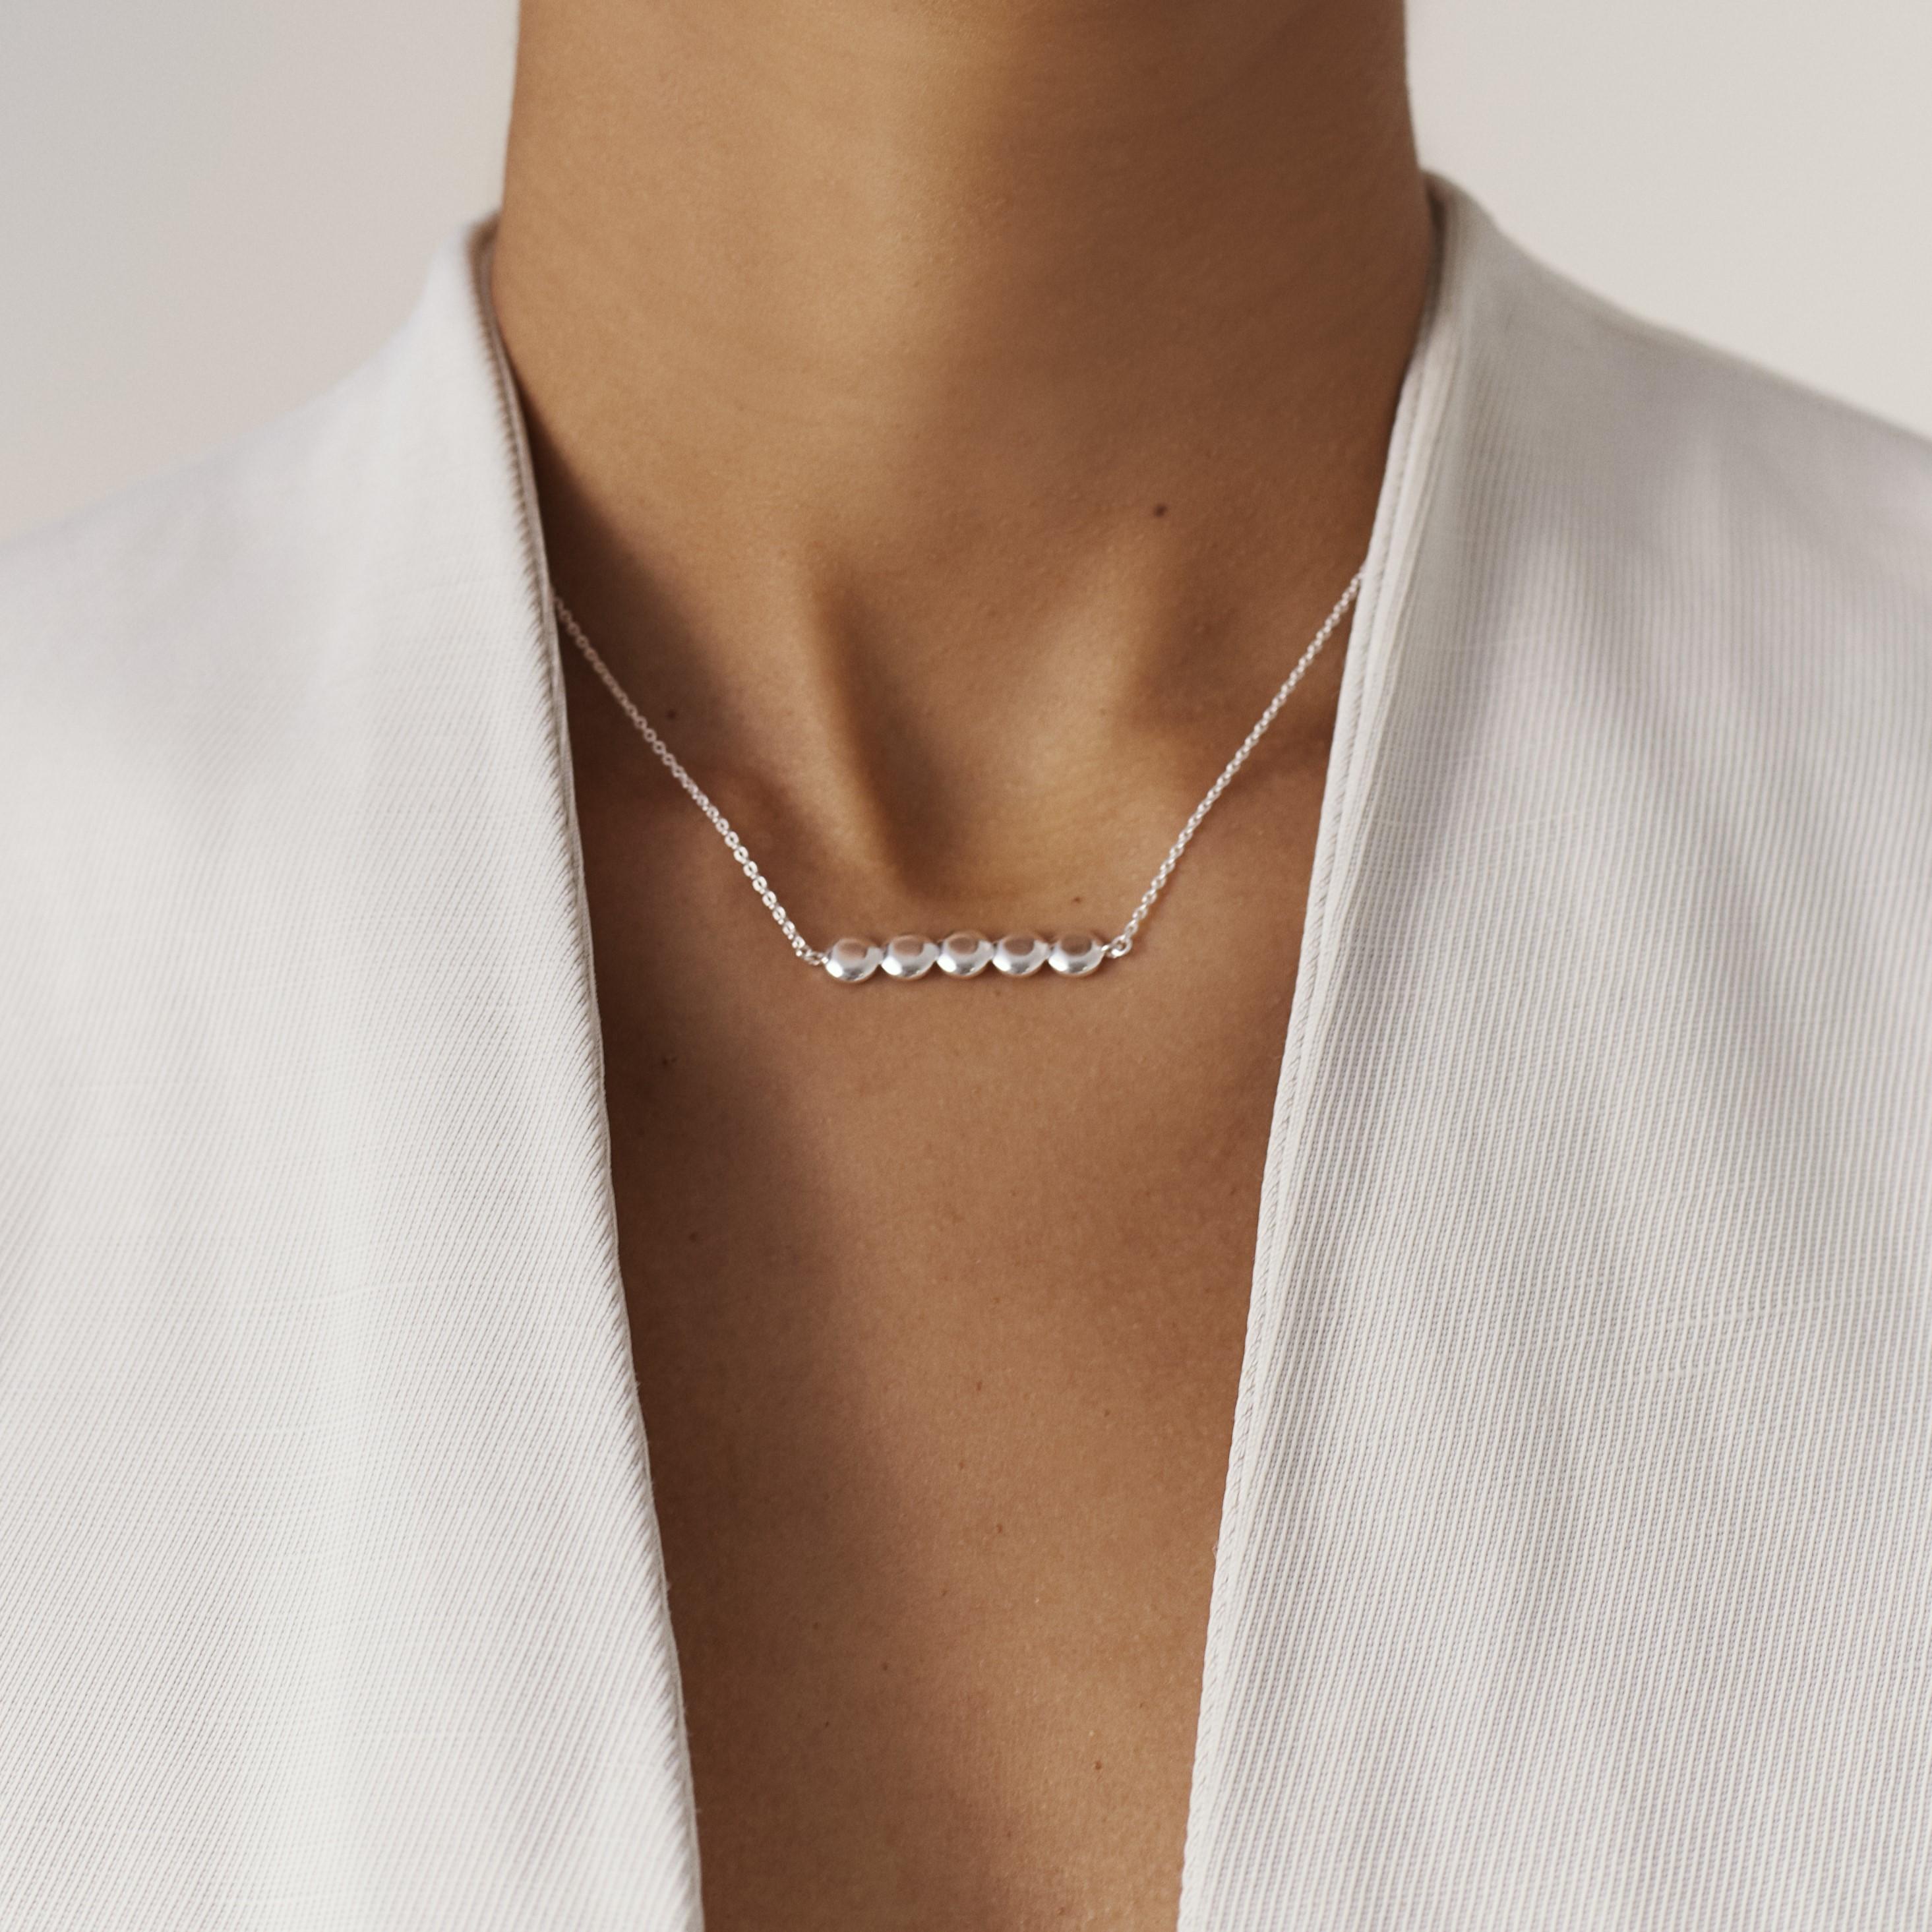 Also available in recycled 18k gold.

SOUL ALONE necklace in the purest recycled silver, adorned with five silver diamonds. A modern classic, this understated fine necklace is sure to become a favourite choice with any style of outfit.

THE KINDRED